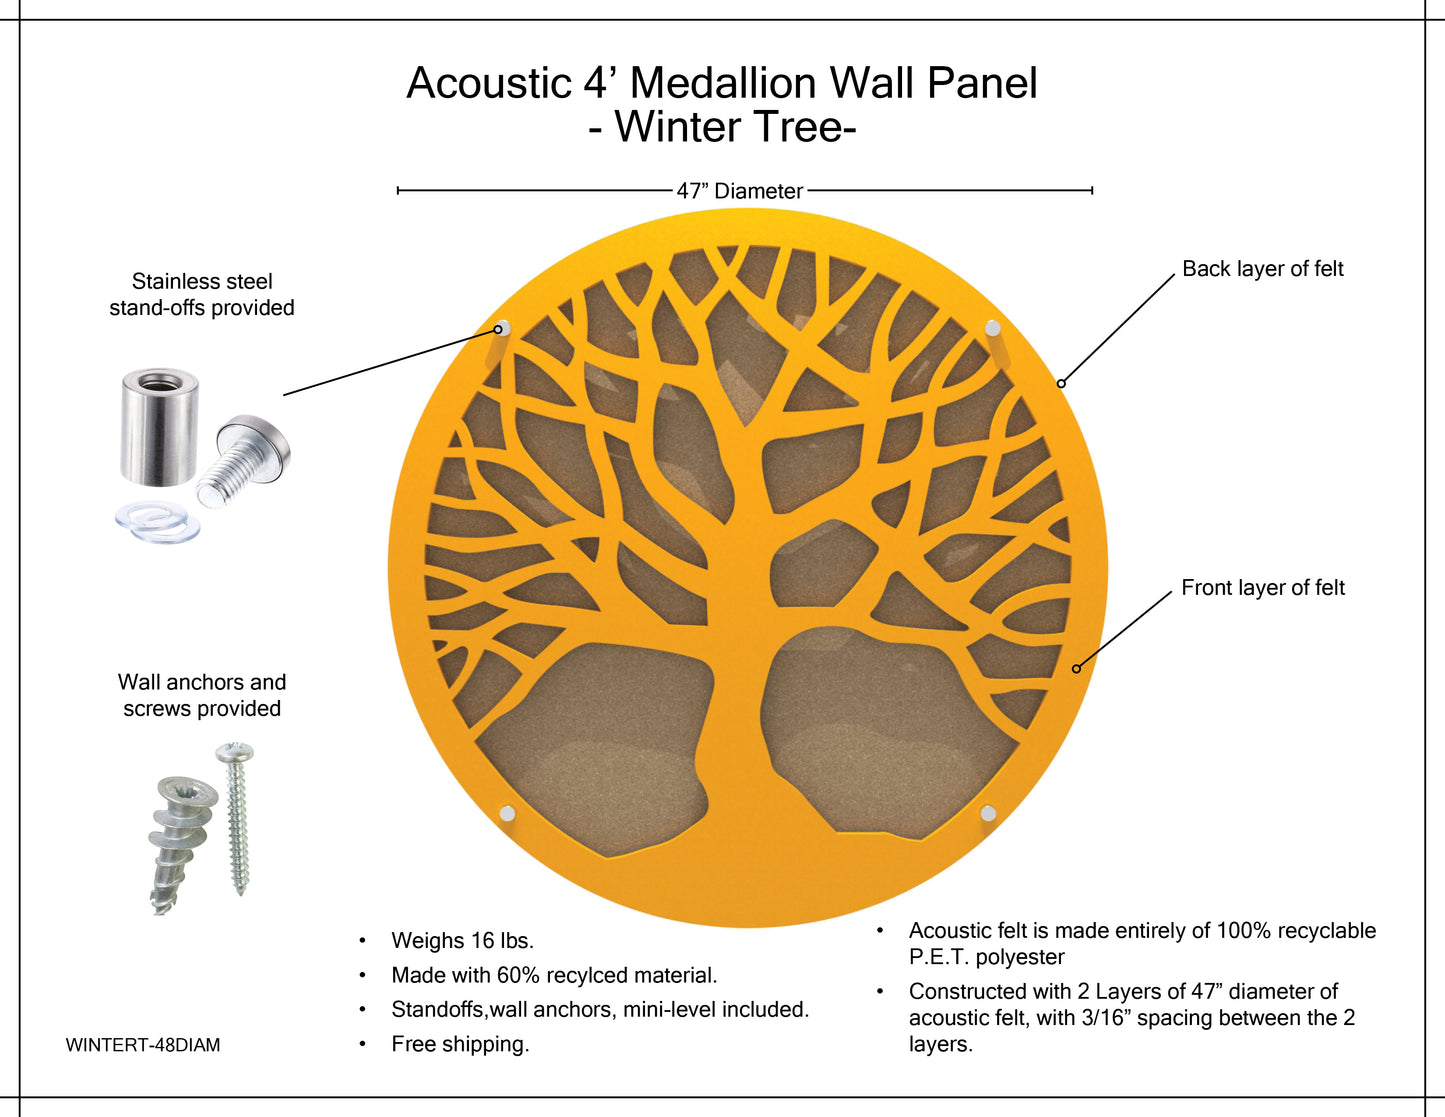 Medallion Acoustic Wall Panel - Winter Tree